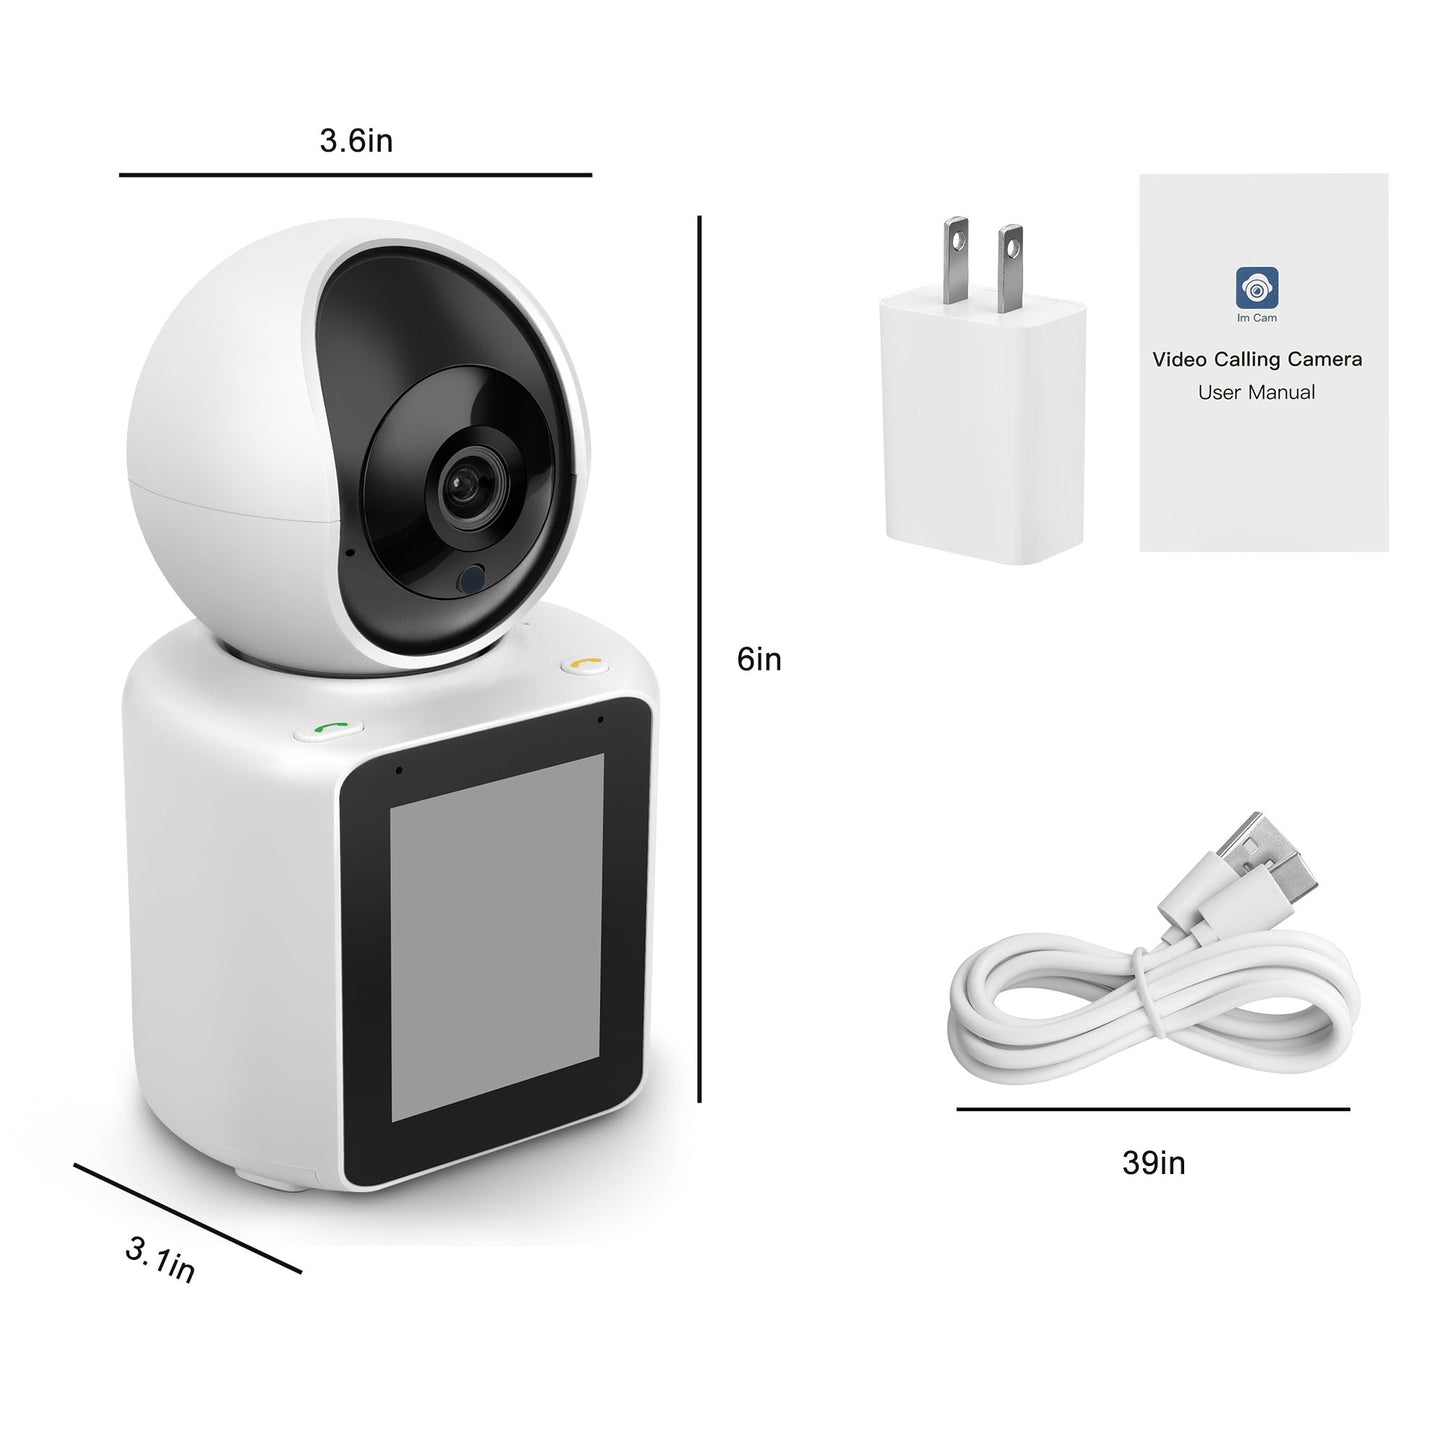 Two-Way Video Camera, 2.8'' 1080p HD Screen, Night Vision, Motion Detection for Baby, Elderly